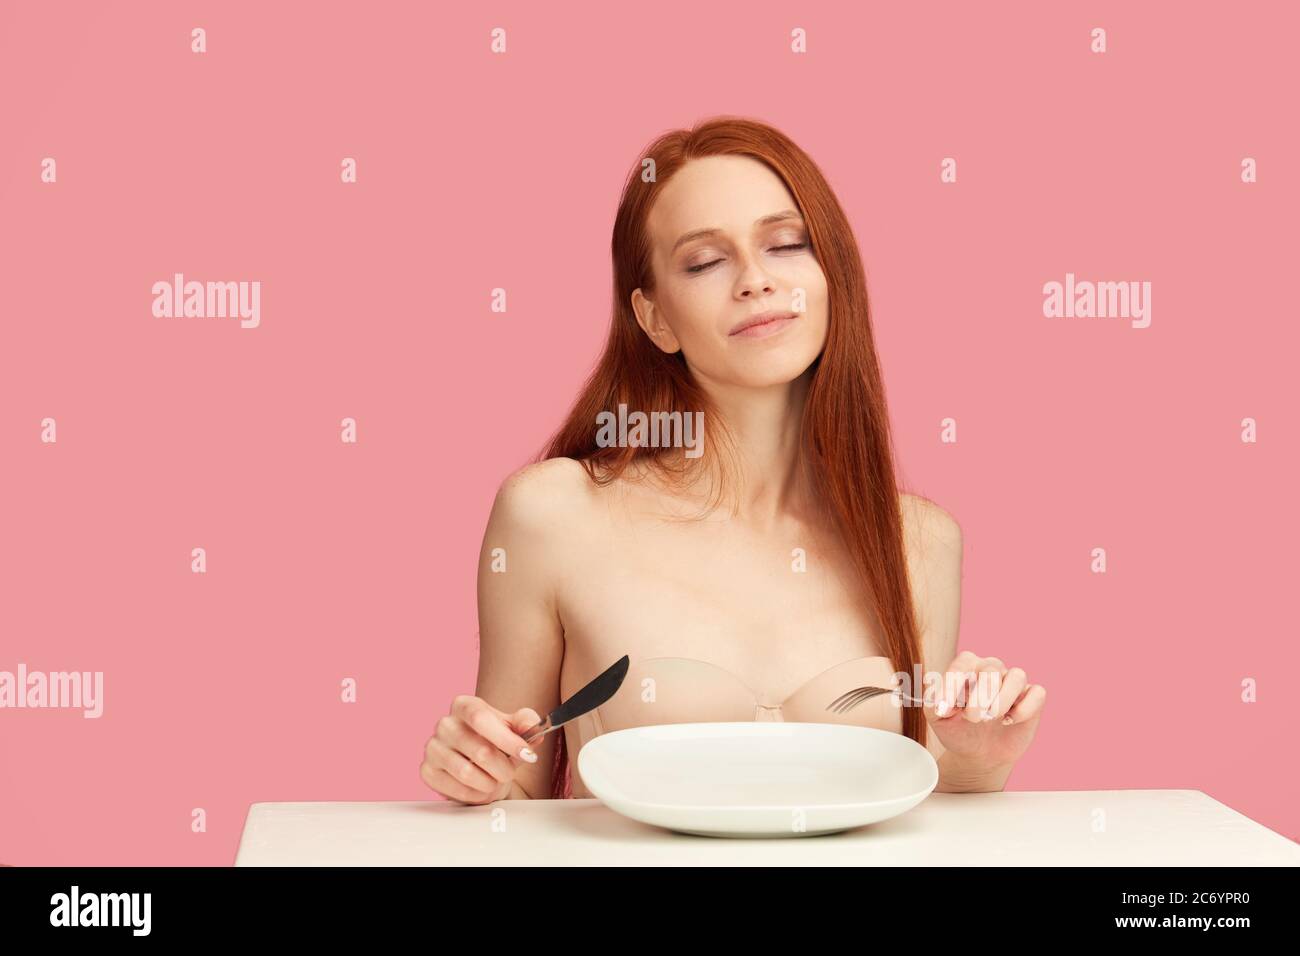 Red-haired anorexic woman dreaming about cake sitting at table with empty plate. Diet Concept. Weight Loss Problem. Starving Young Woman. Mental break Stock Photo